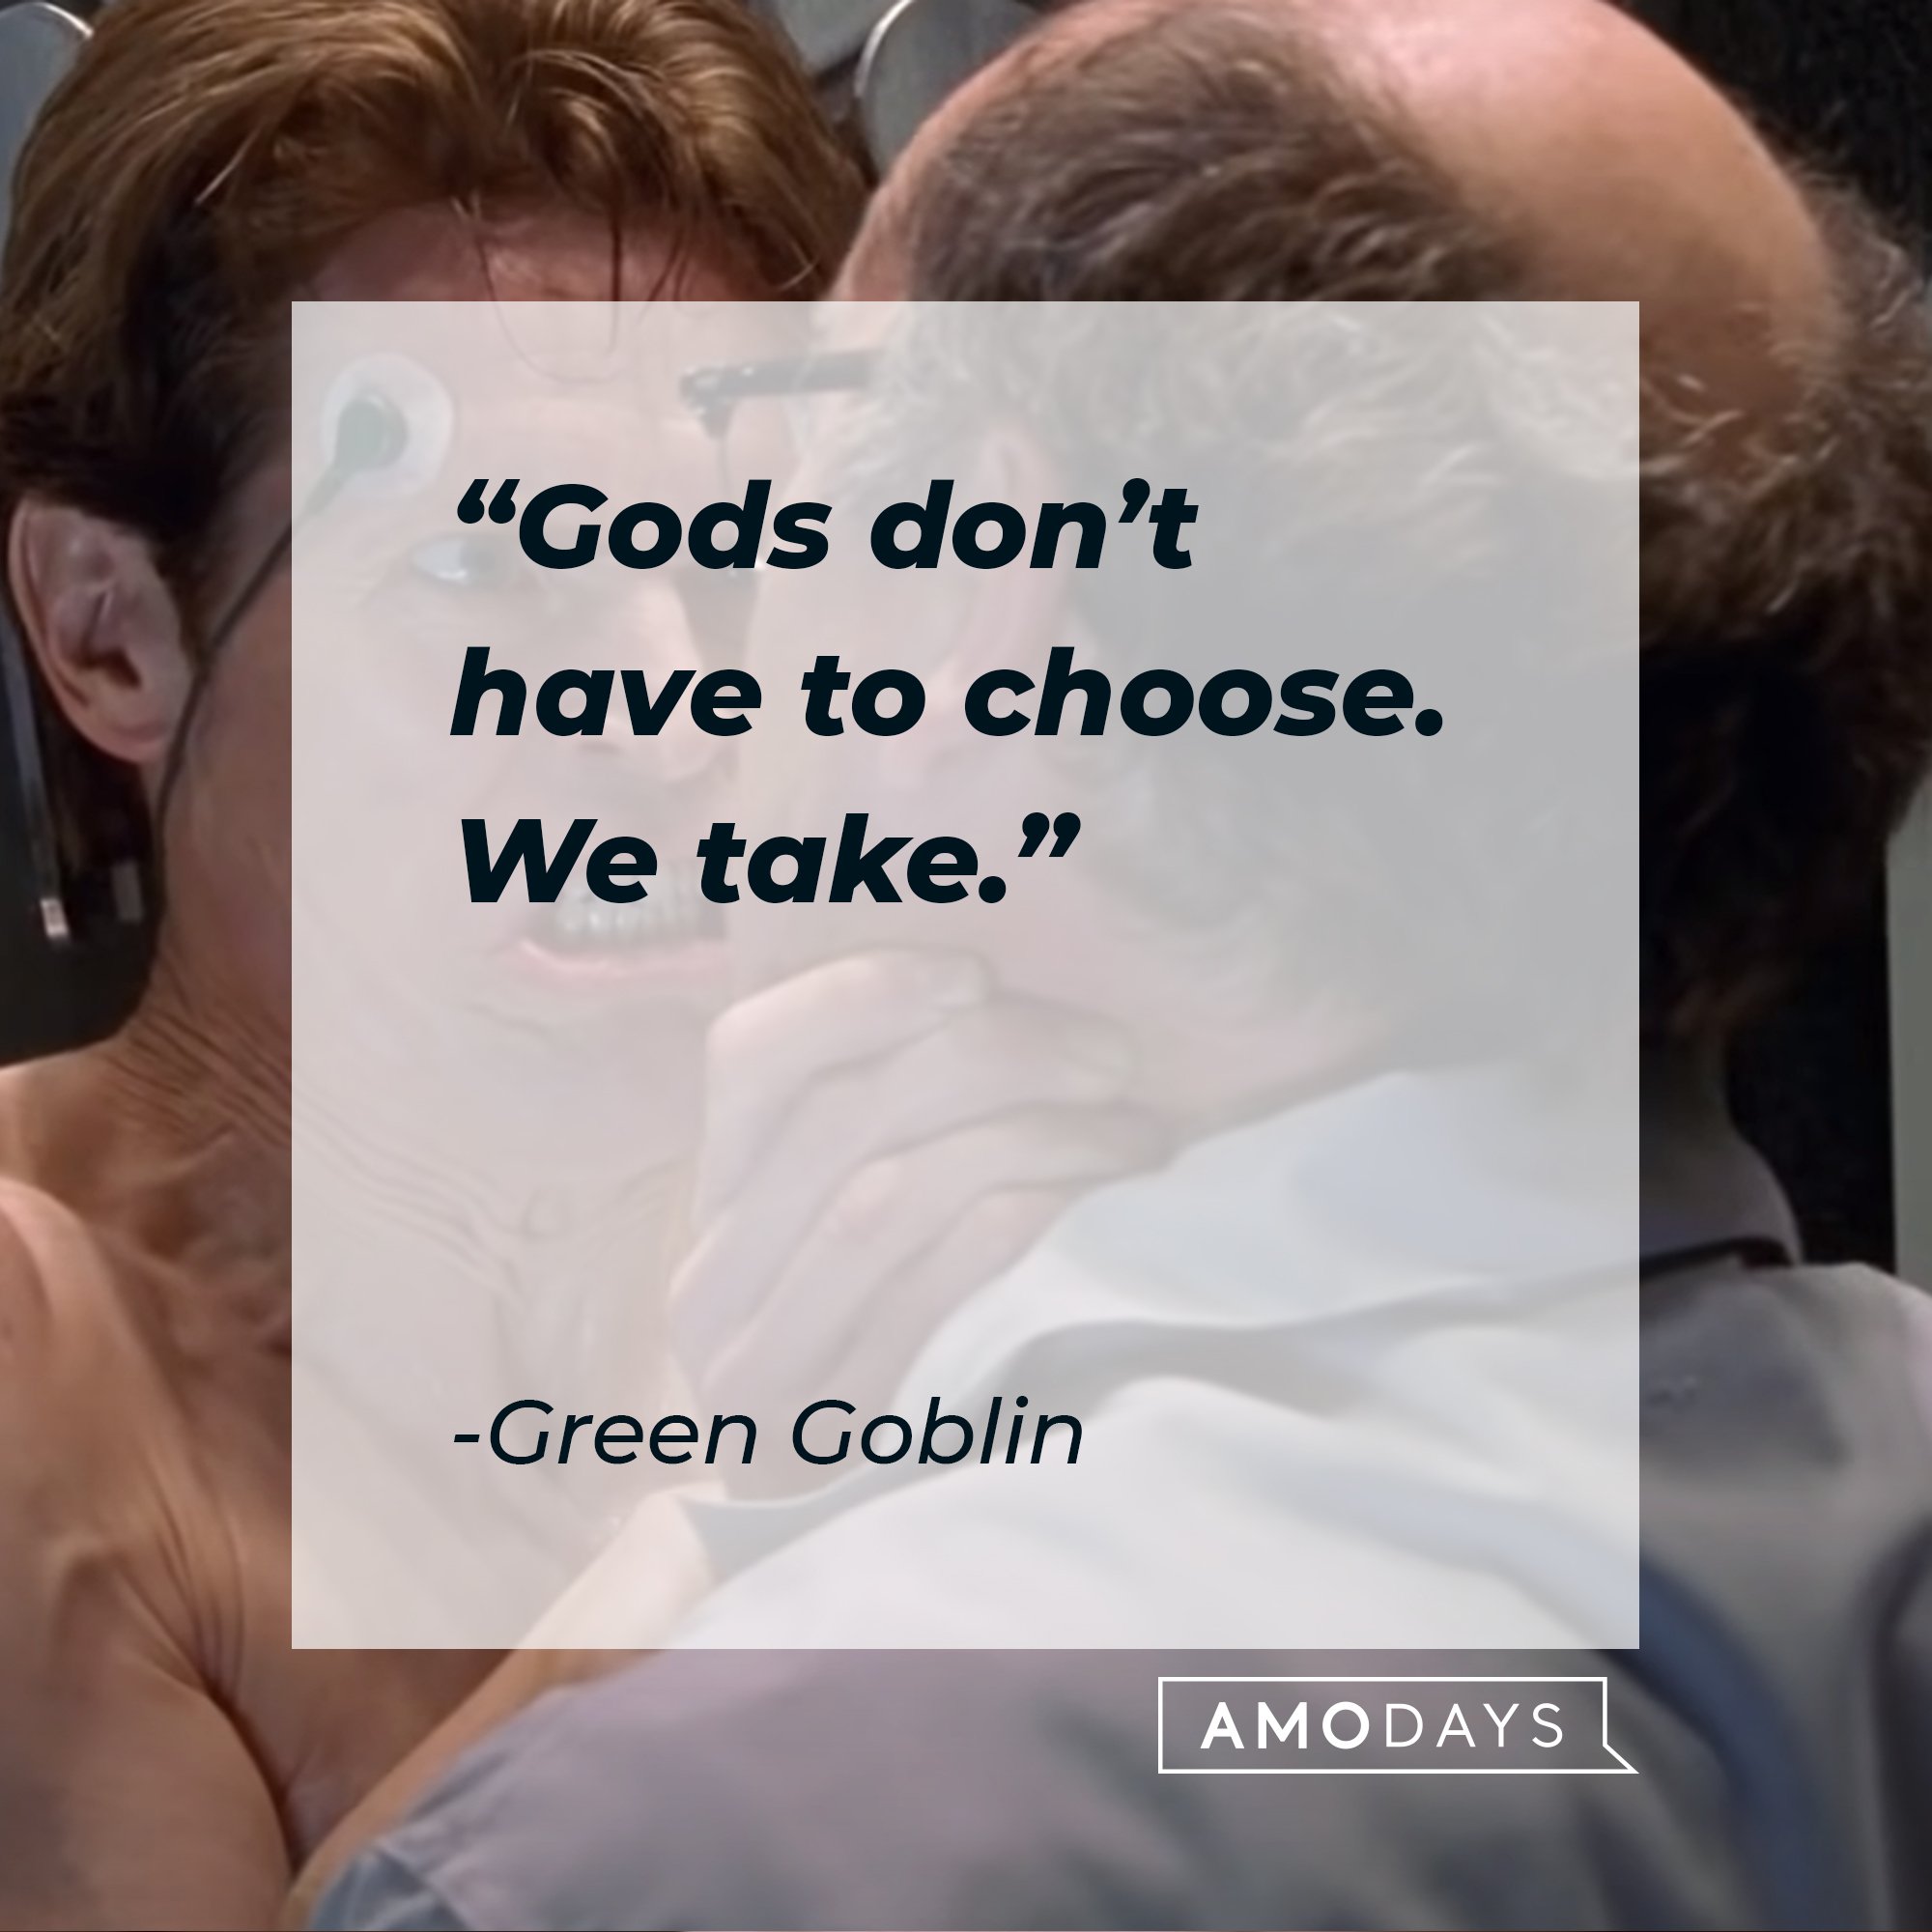 Green Goblin’s quote: “Gods don’t have to choose. We take.” | Image: AmoDays